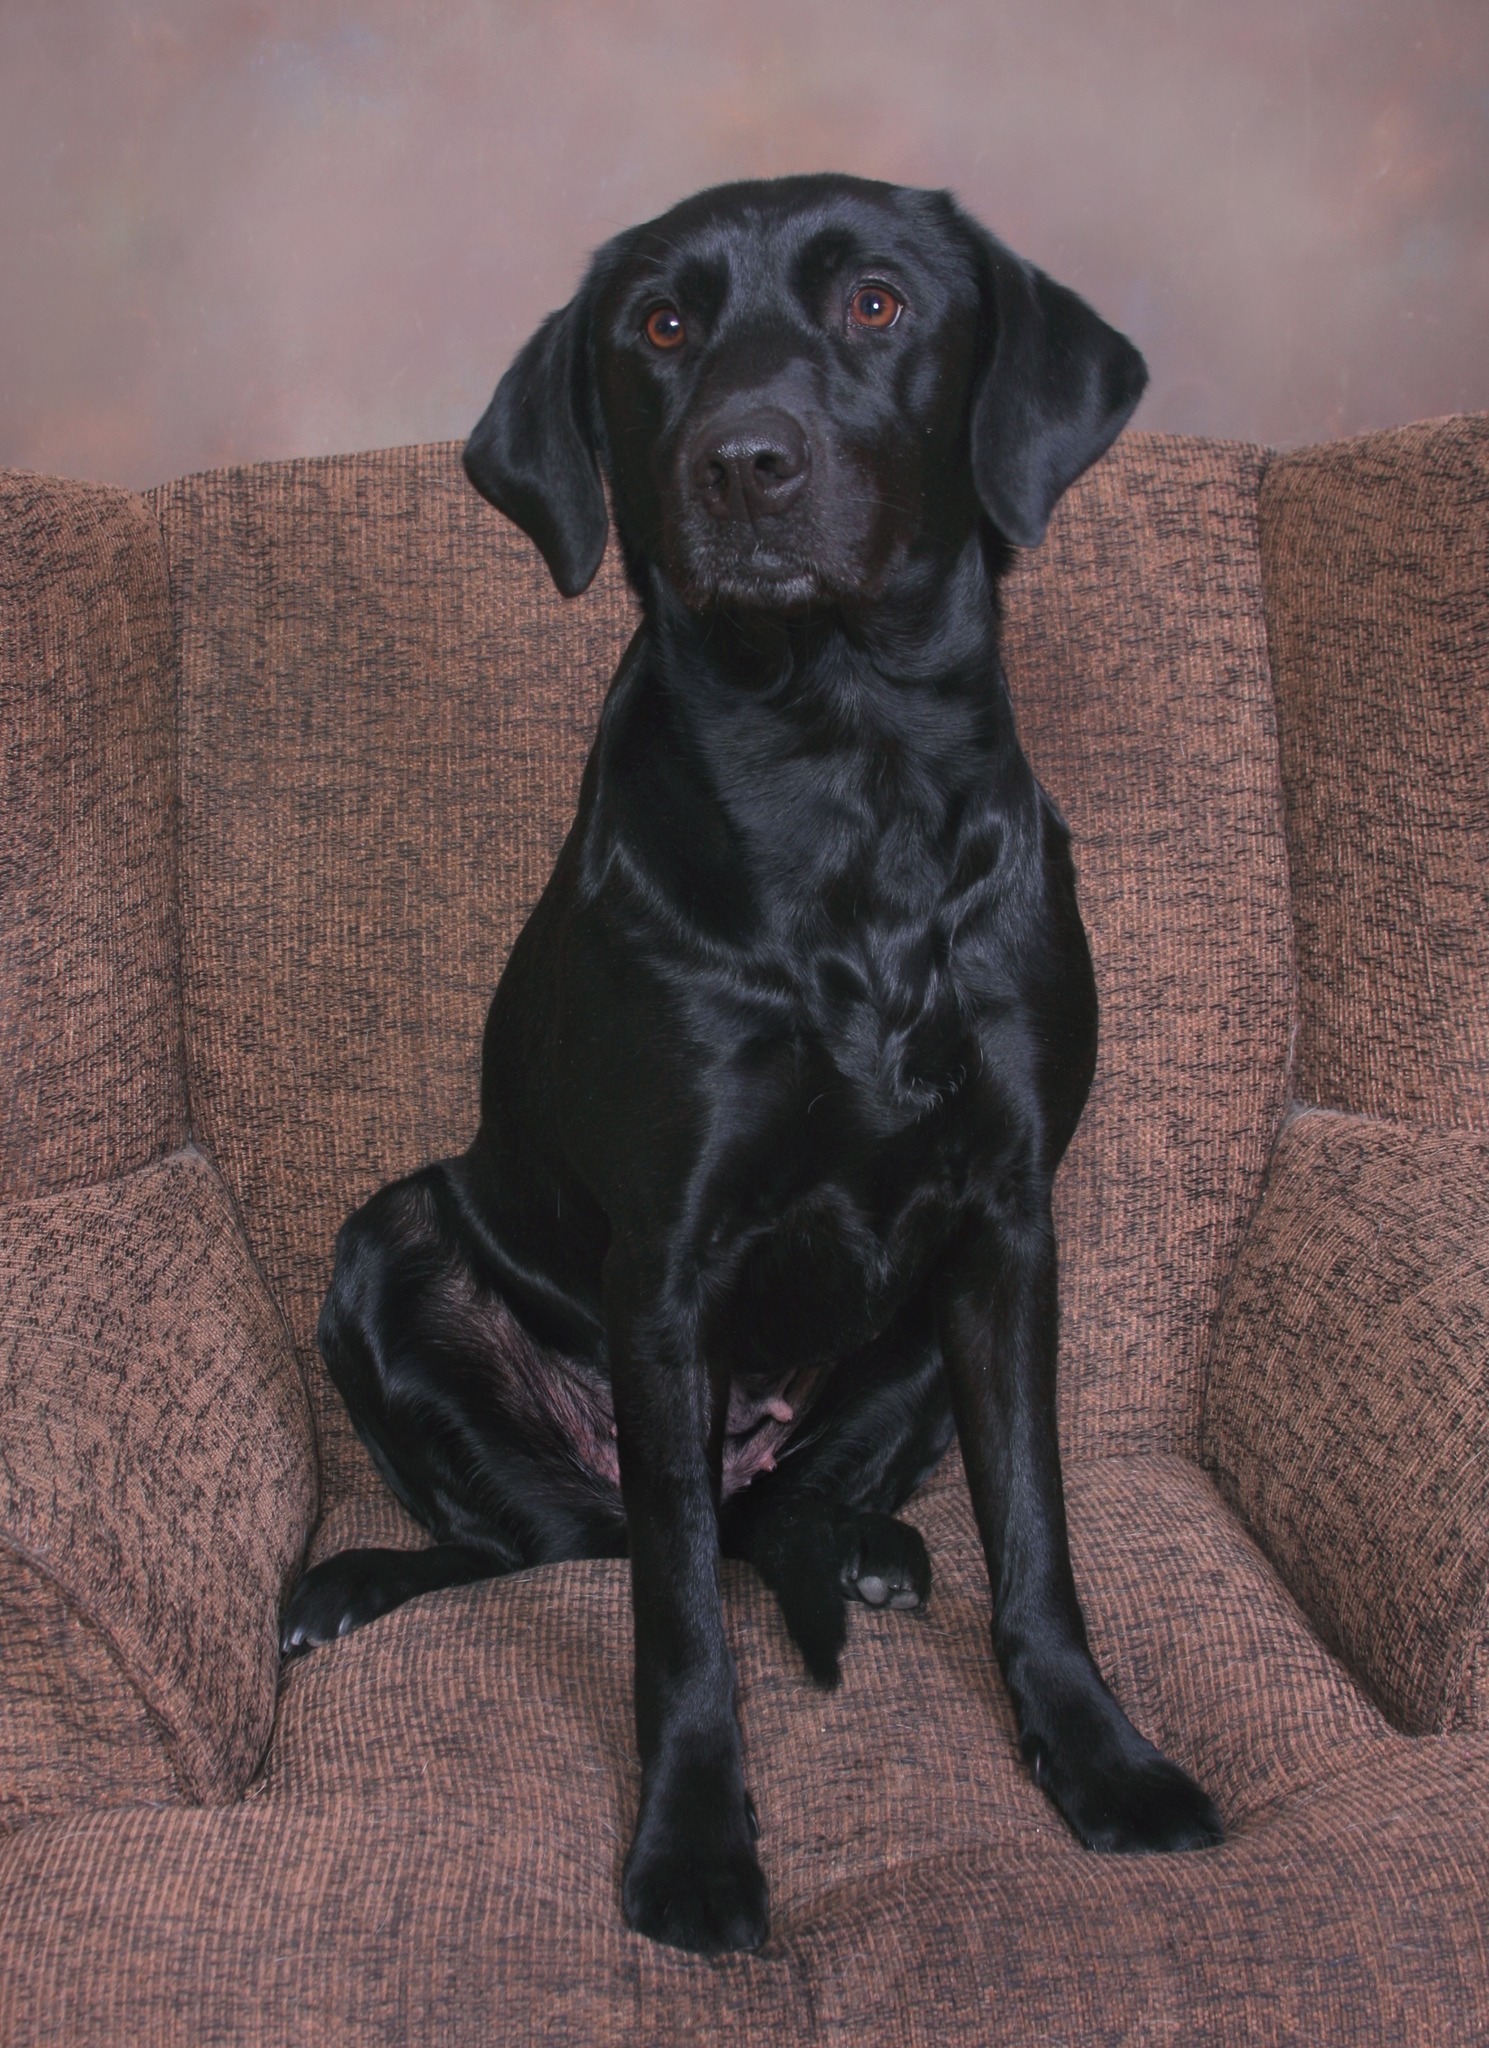 gorgeous black lab looks at camera, sitting on a muted brown couch